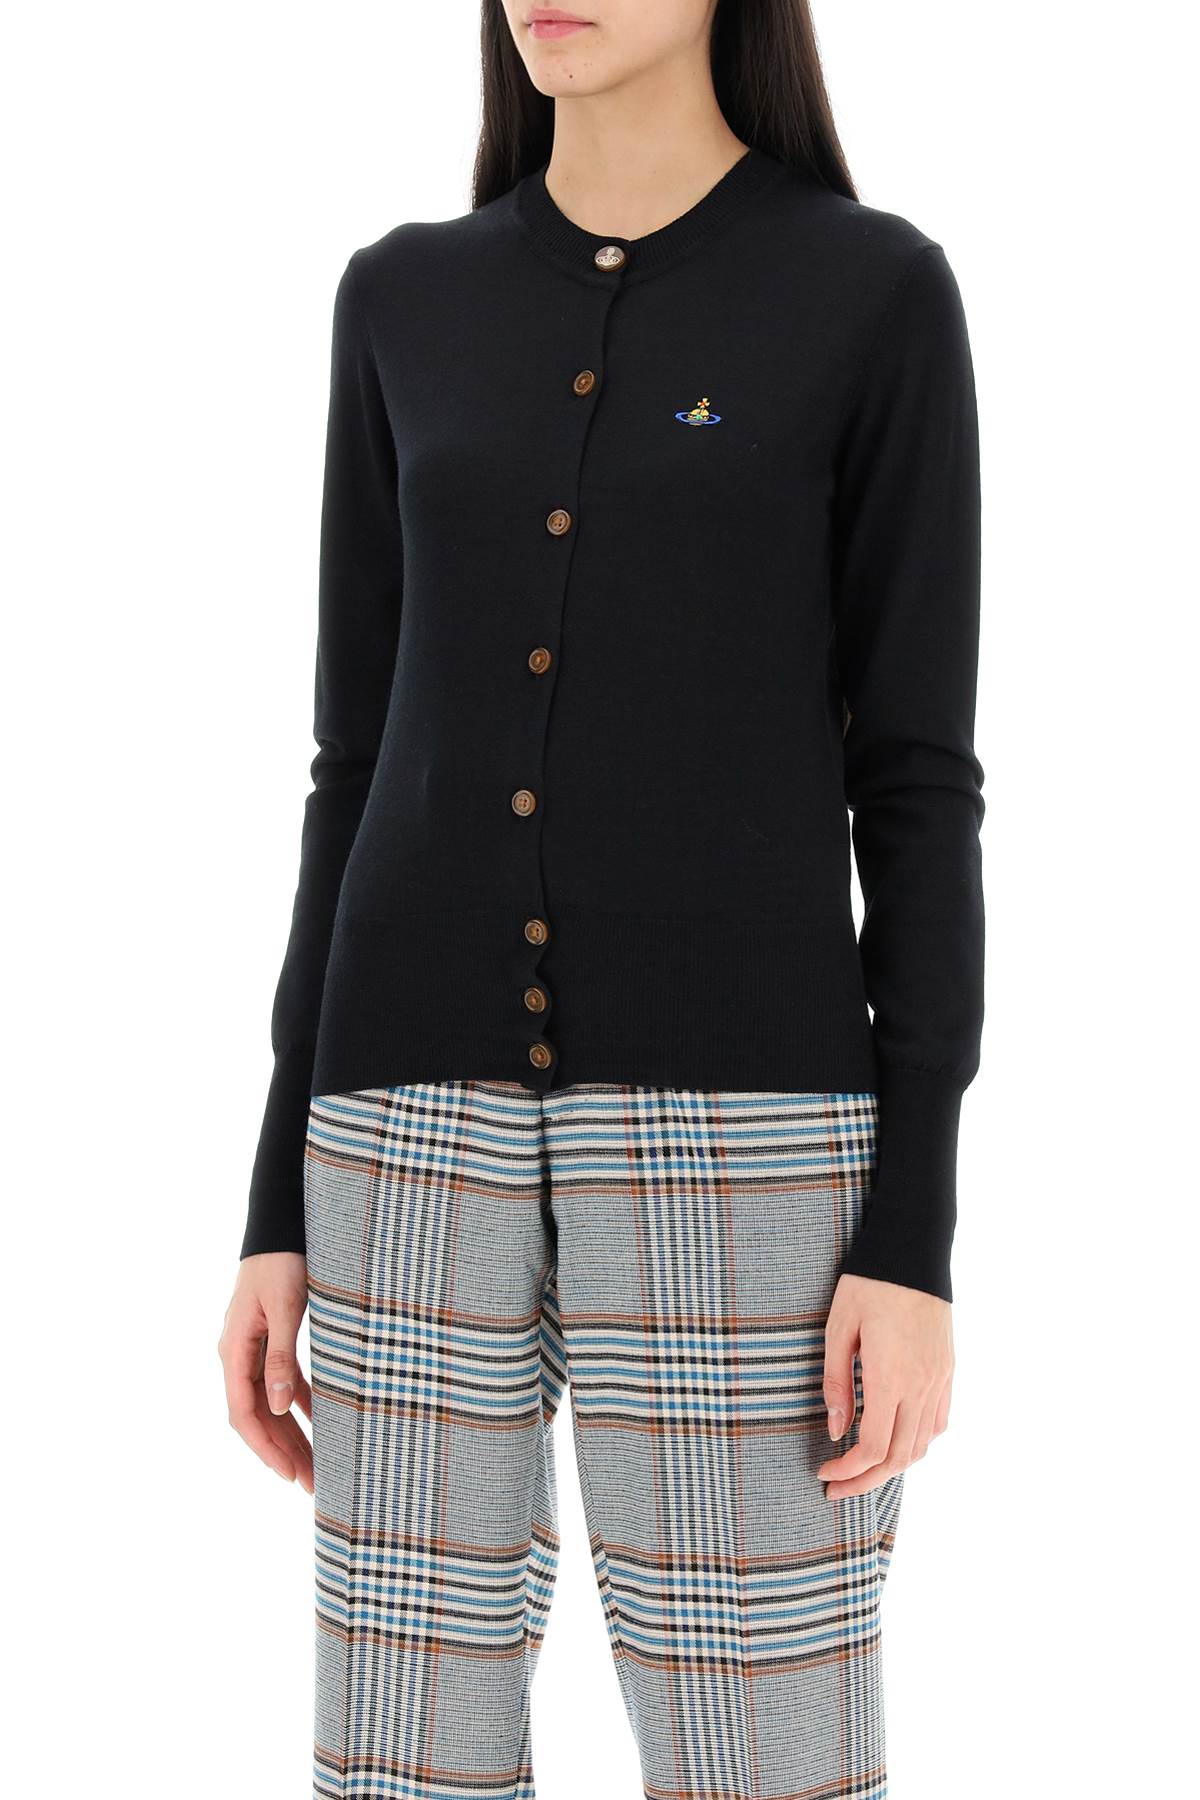 Vivienne westwood bea cardigan with embroidered logo-3